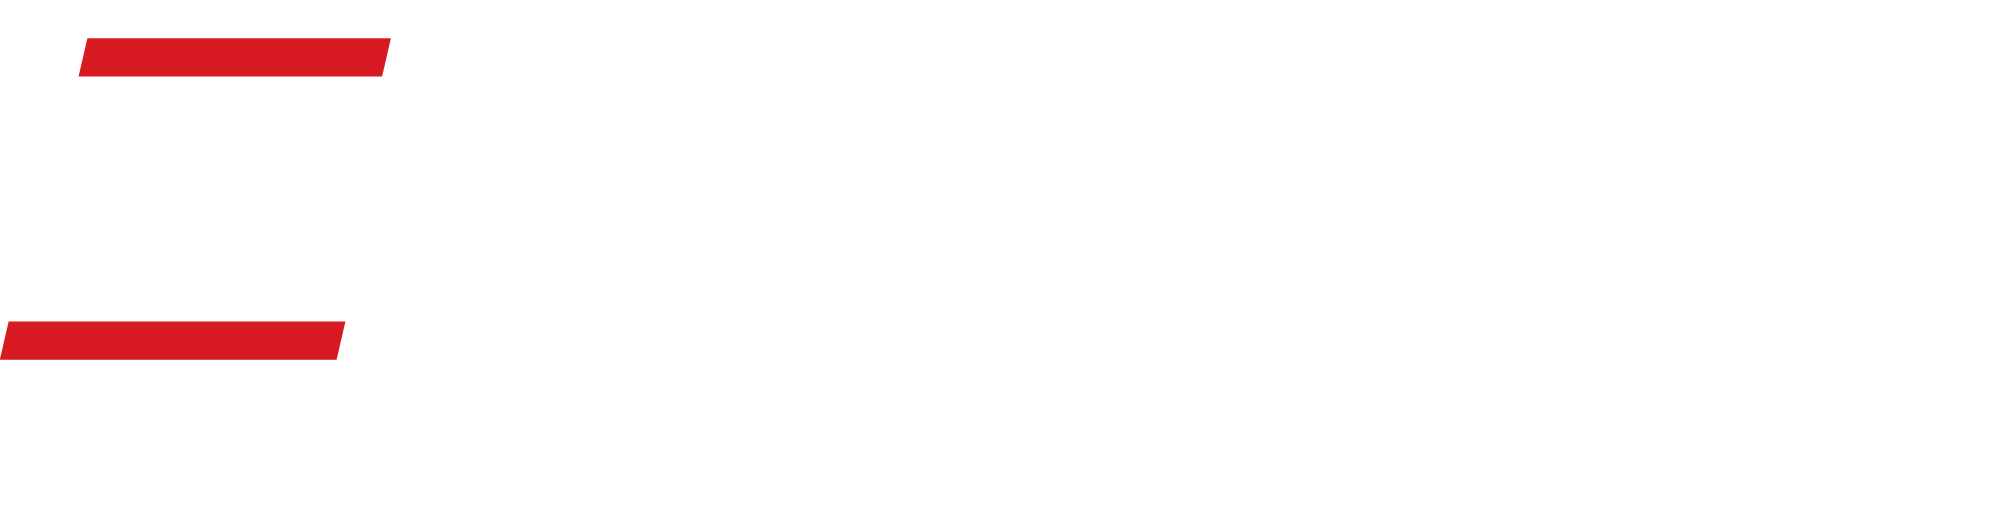 All Chevy Performance logo